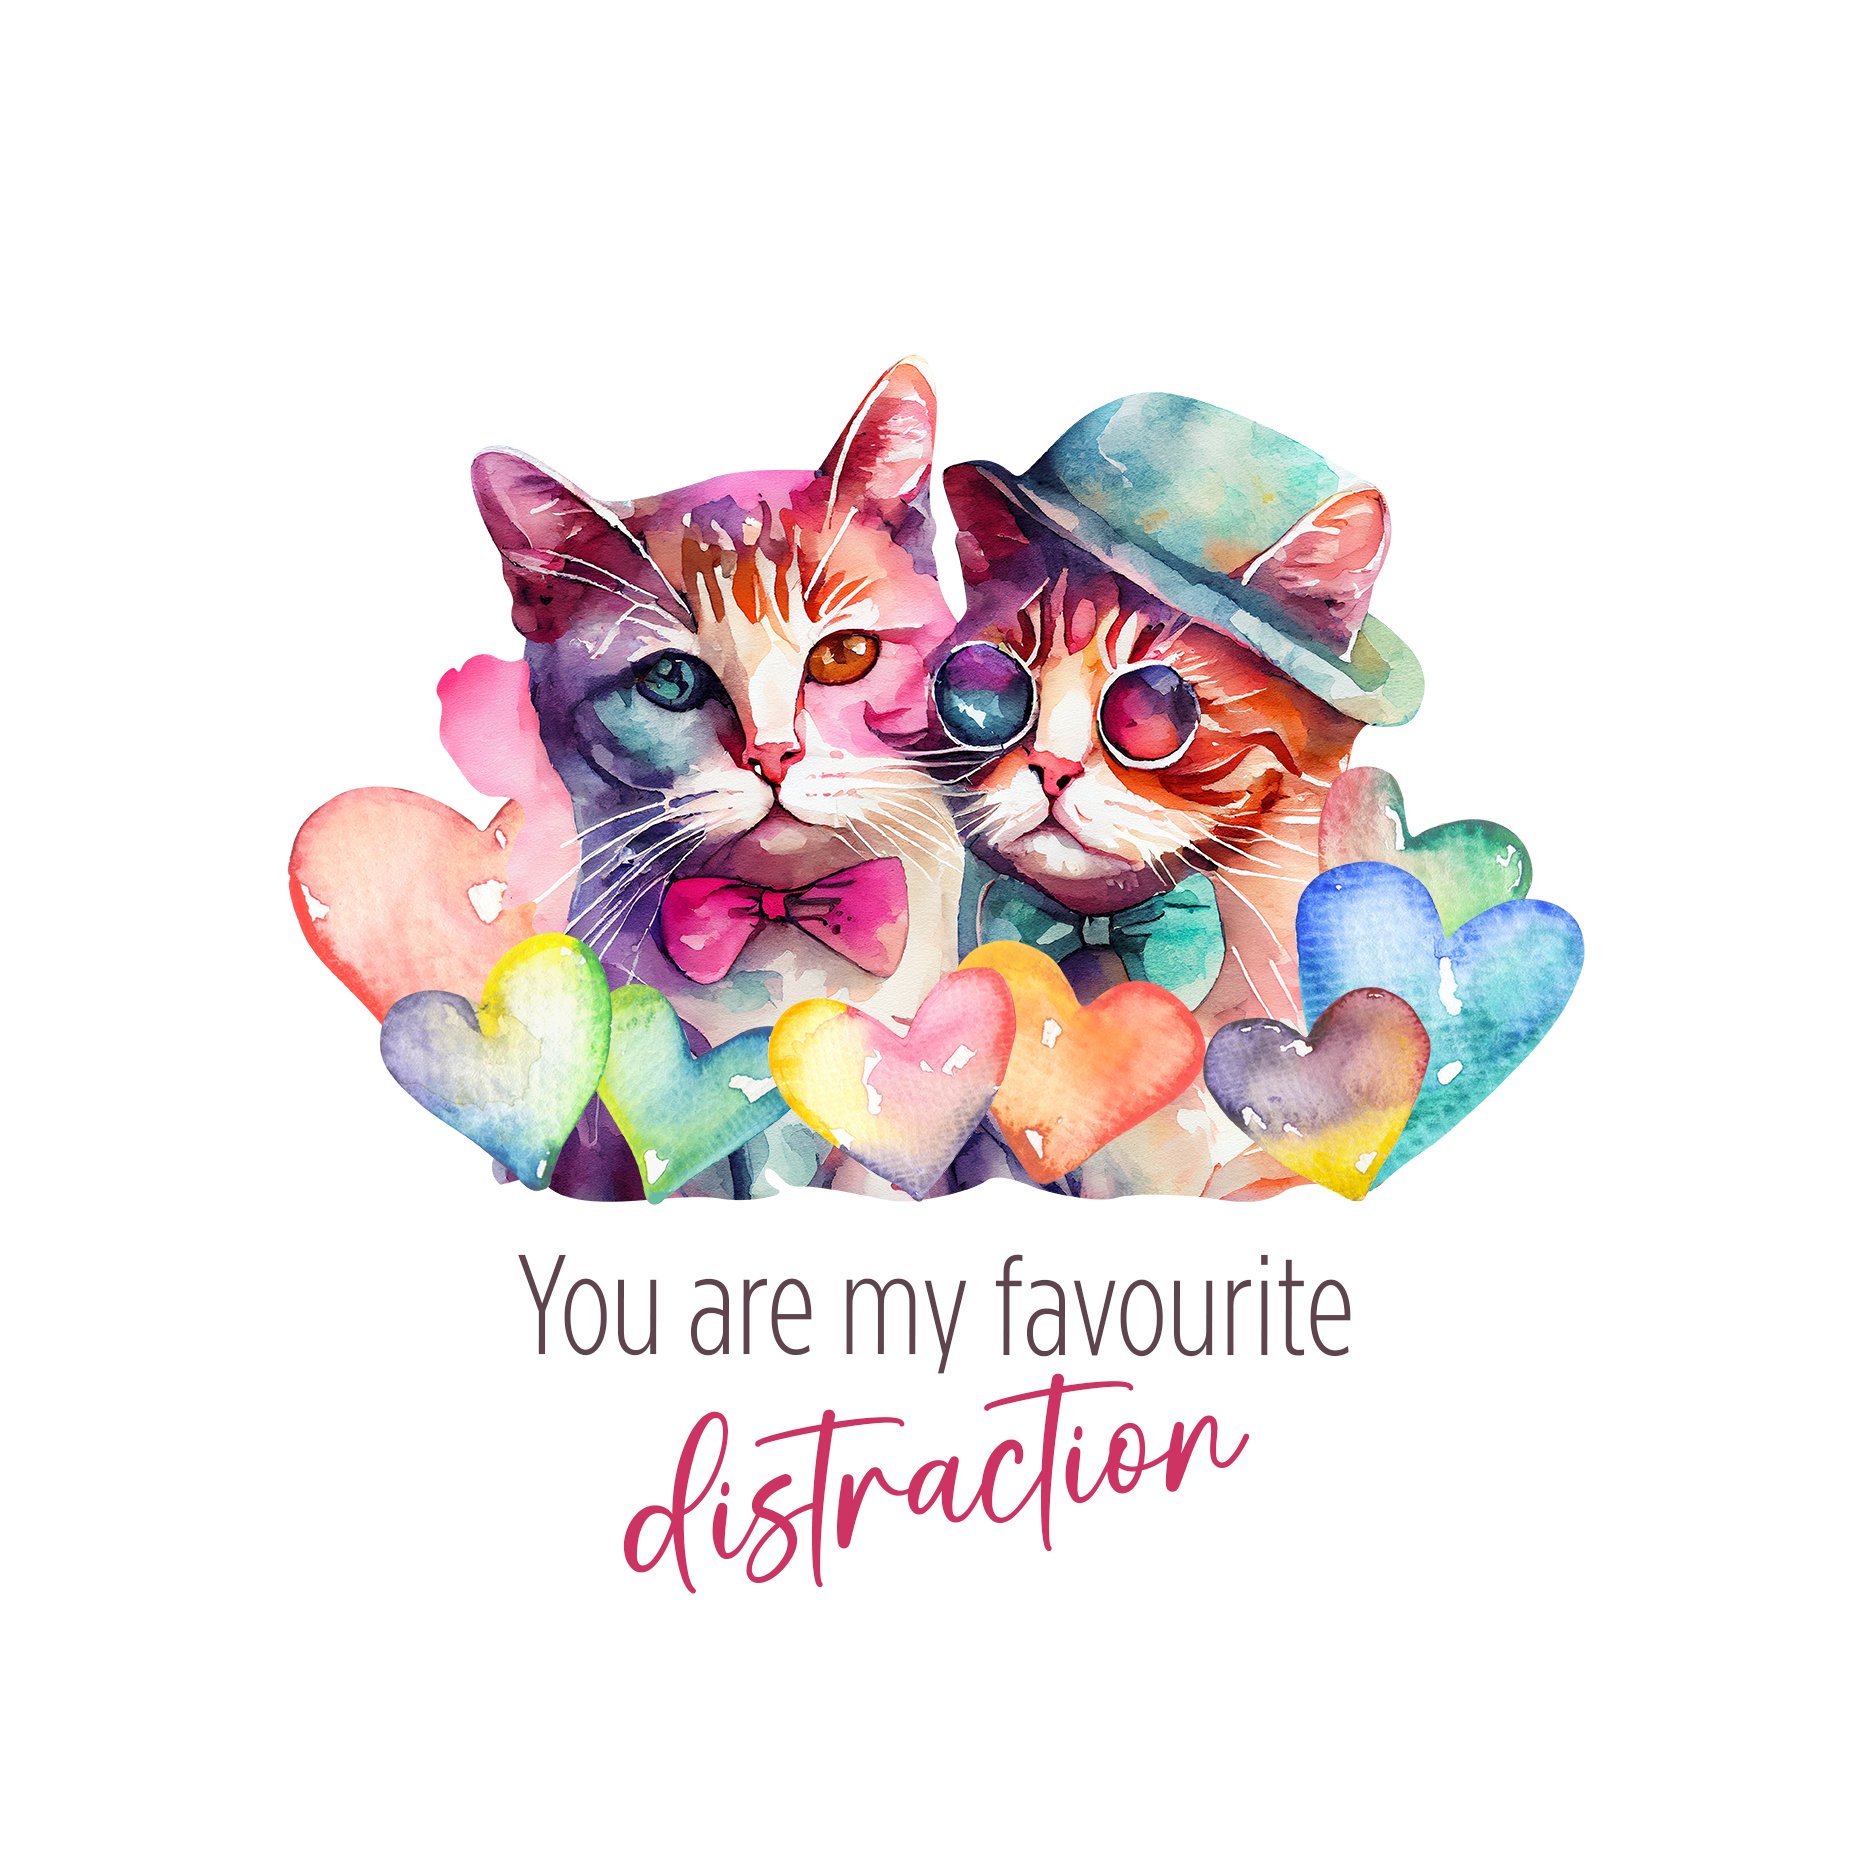 My favourite distraction valentine's day card